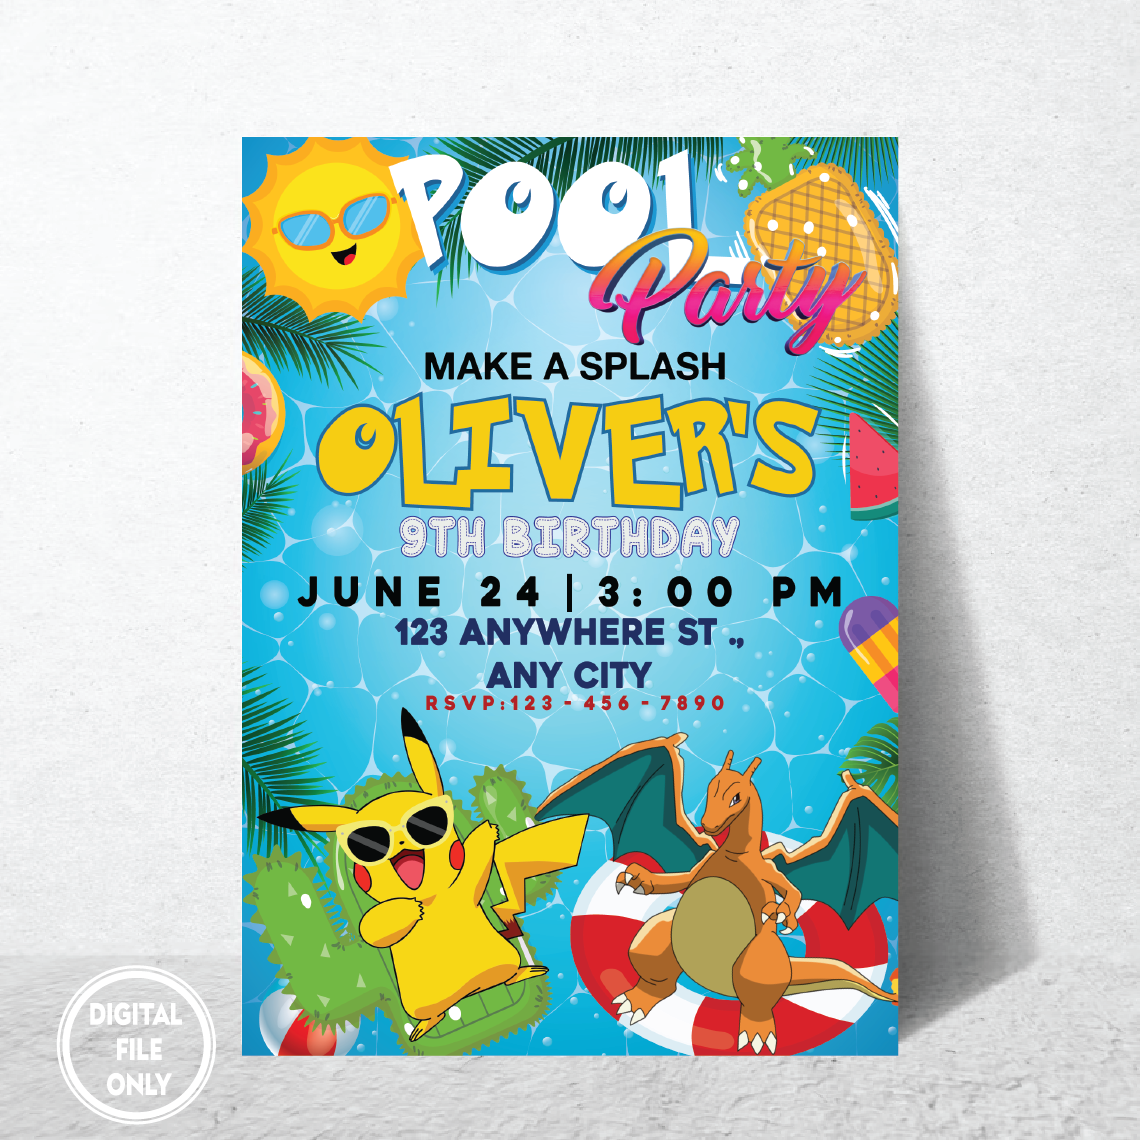 Personalized File Pokemone Birthday Invitation Digital, Pikachu Party Invite, Summer Pool Party Invitation, For Gamer Pool Birthday Boy Party PNG File Only